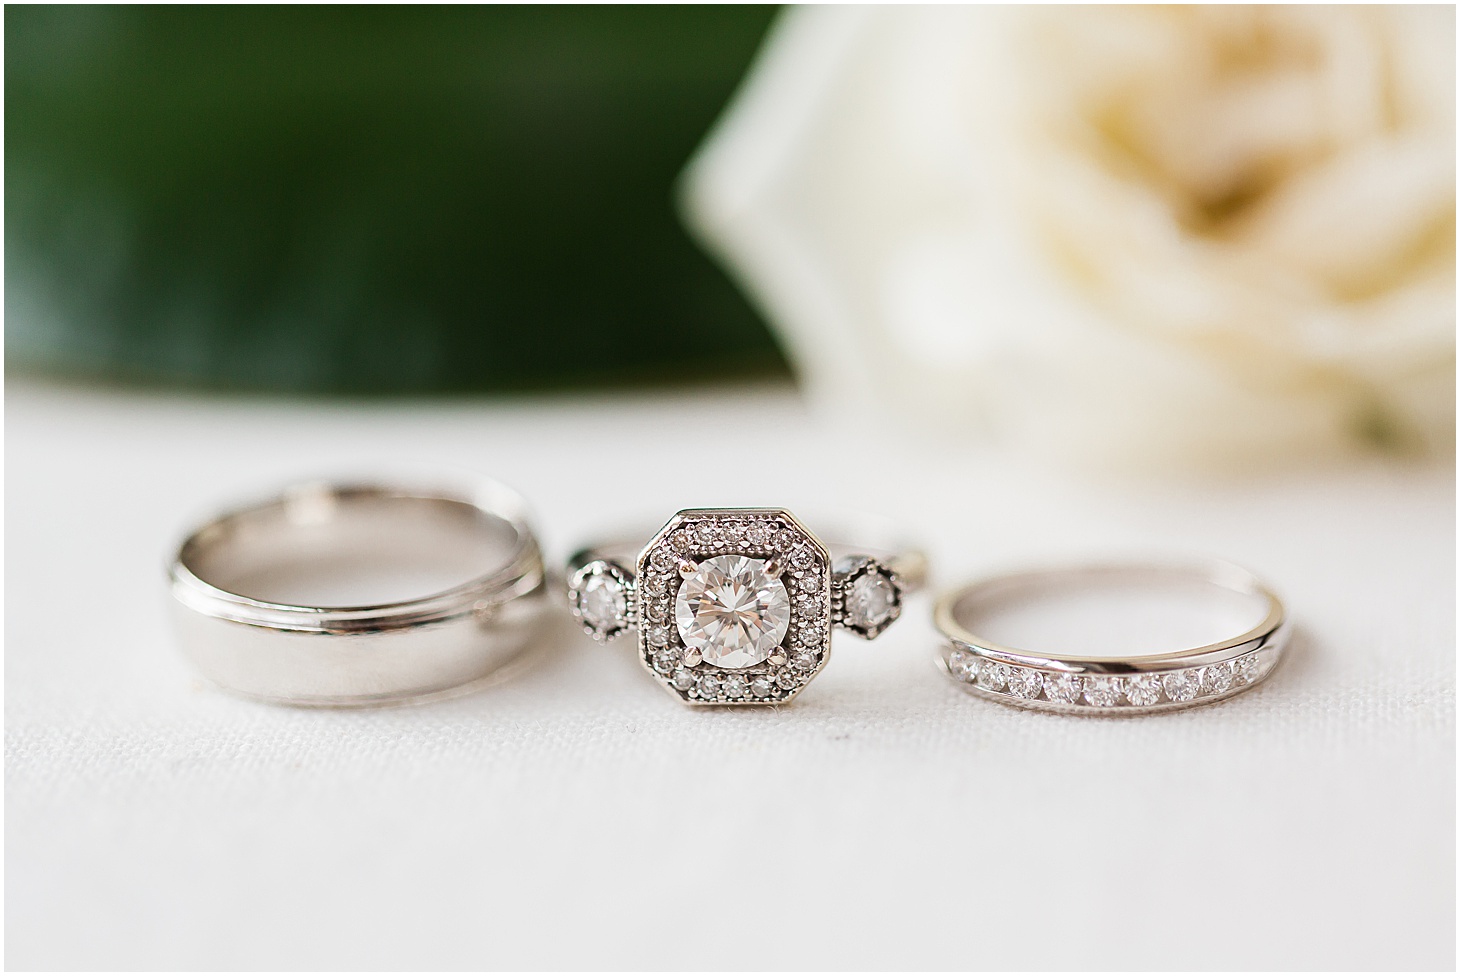 Engagement Ring and Wedding Bands from Anter Jewelry at Quirk Hotel, Ceremony at Grace and Holy Trinity Episcopal Church, Burgundy and Blush Christmas Wedding at Richmond’s Commonwealth Club, Sarah Bradshaw Photography